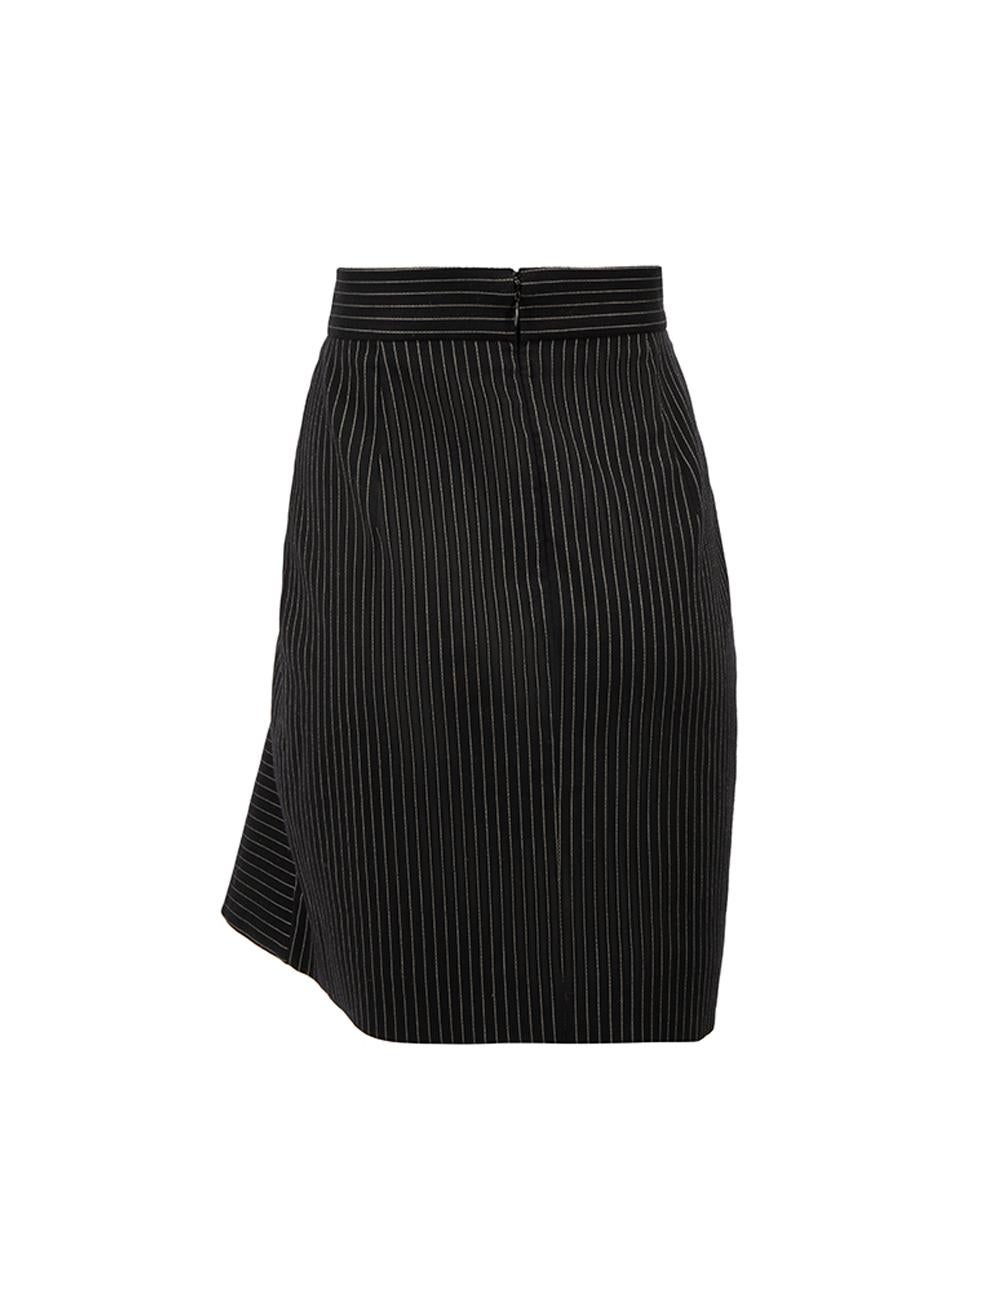 Stella McCartney Women's Black Pinstripe Flared Panelled Mini Skirt In Good Condition For Sale In London, GB